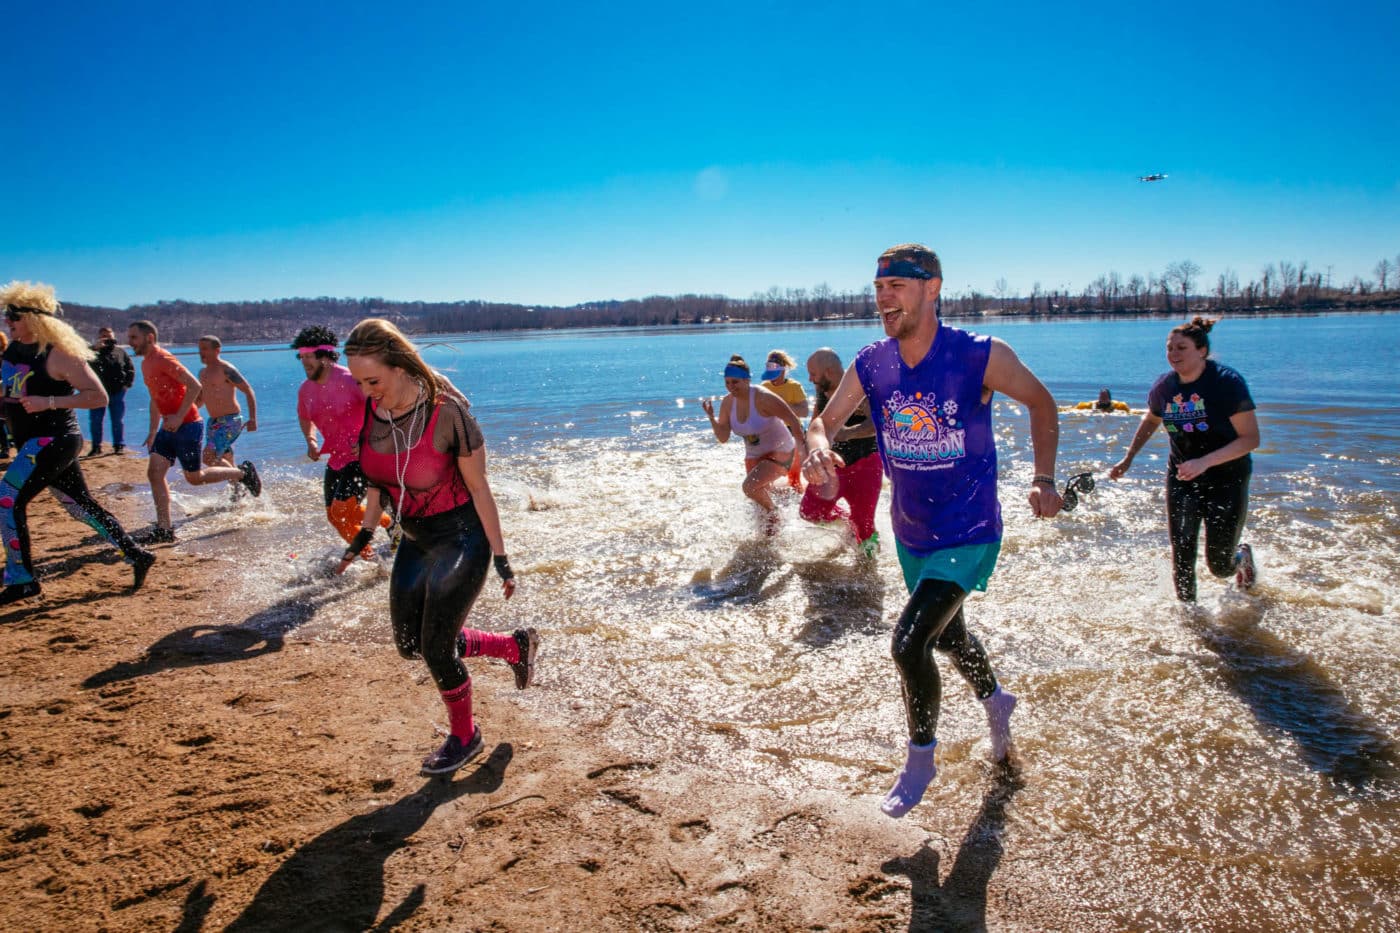 RELEASE SOMO preps for 17th Annual Maryland Heights Polar Plunge